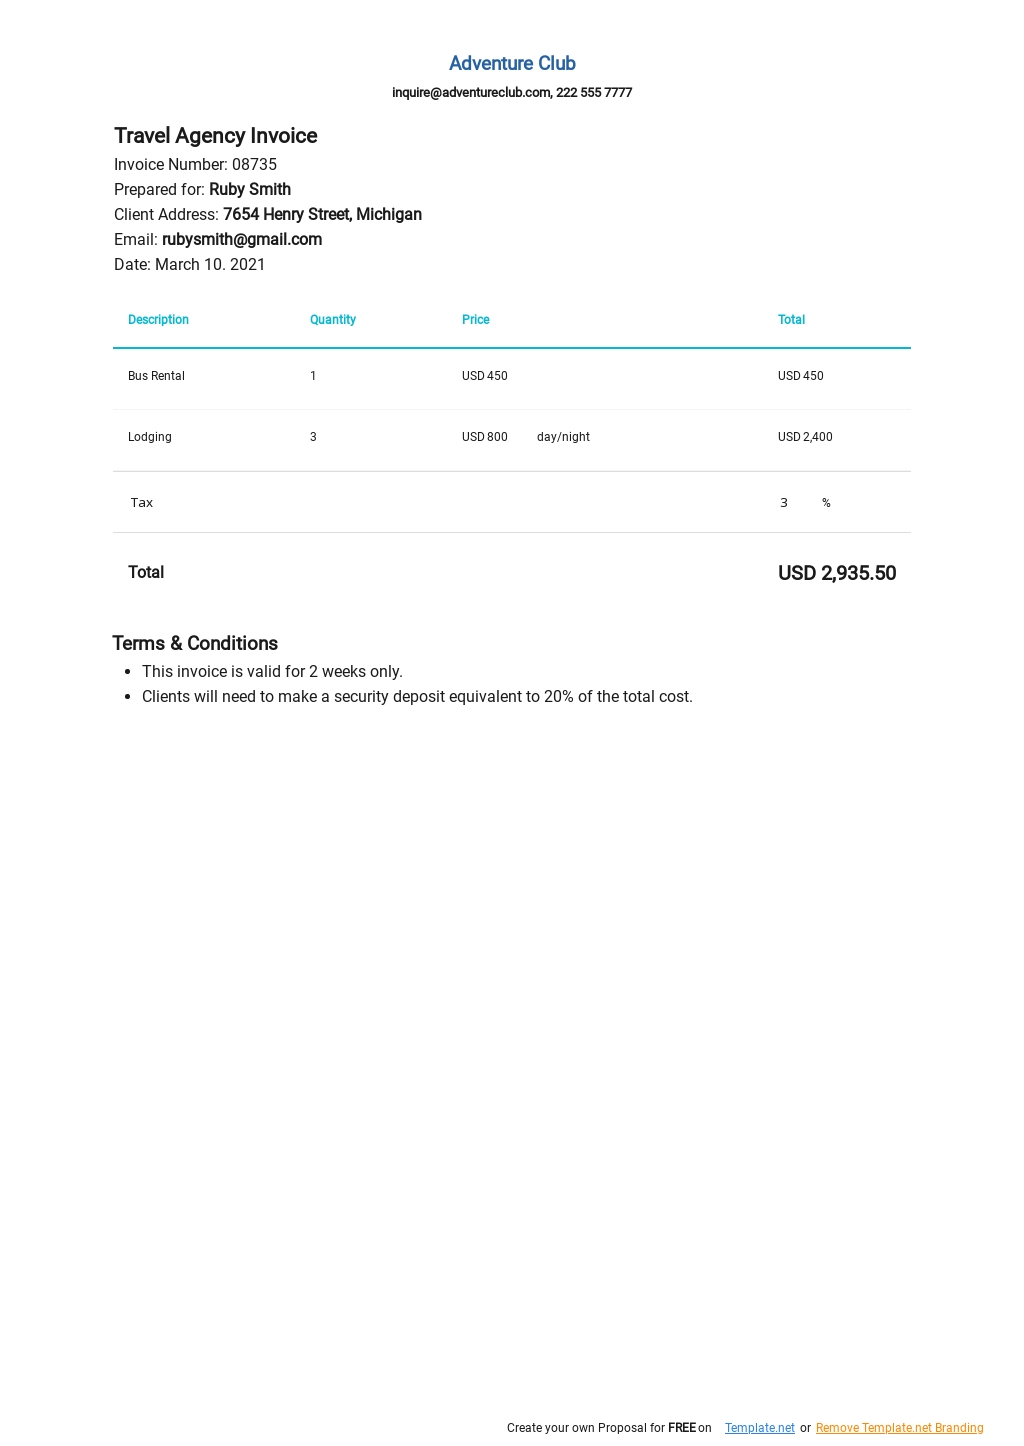 Travel Agency Invoice Template.jpe